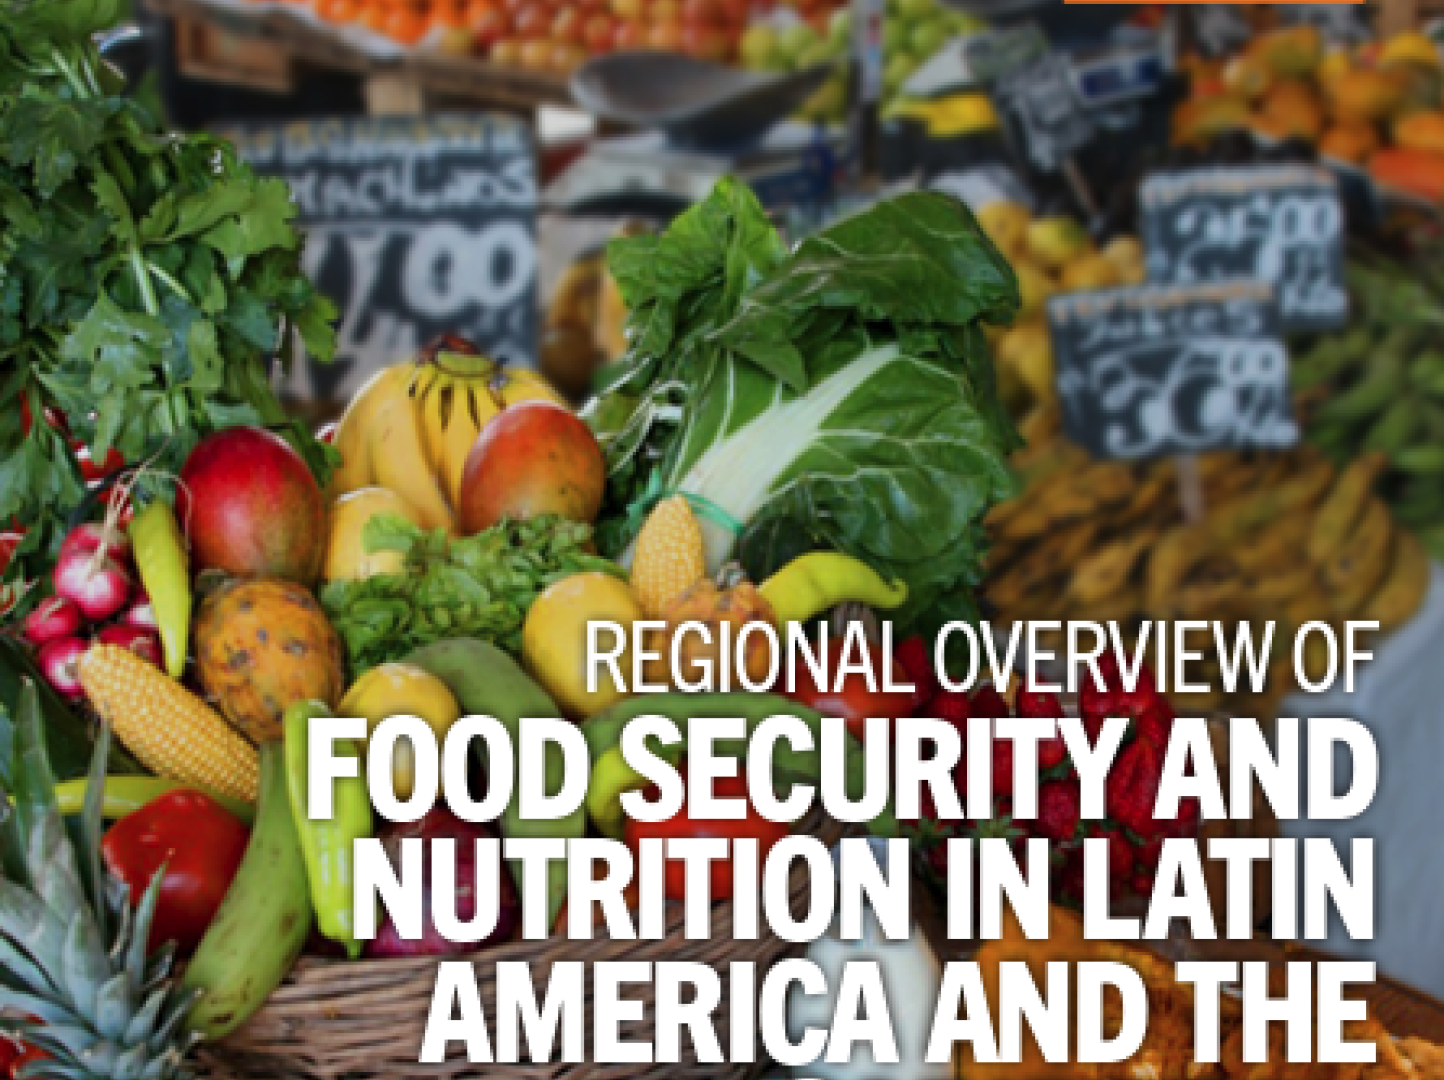 Regional Overview of Food Security and nutrition in Latin America and the Caribbean 2022